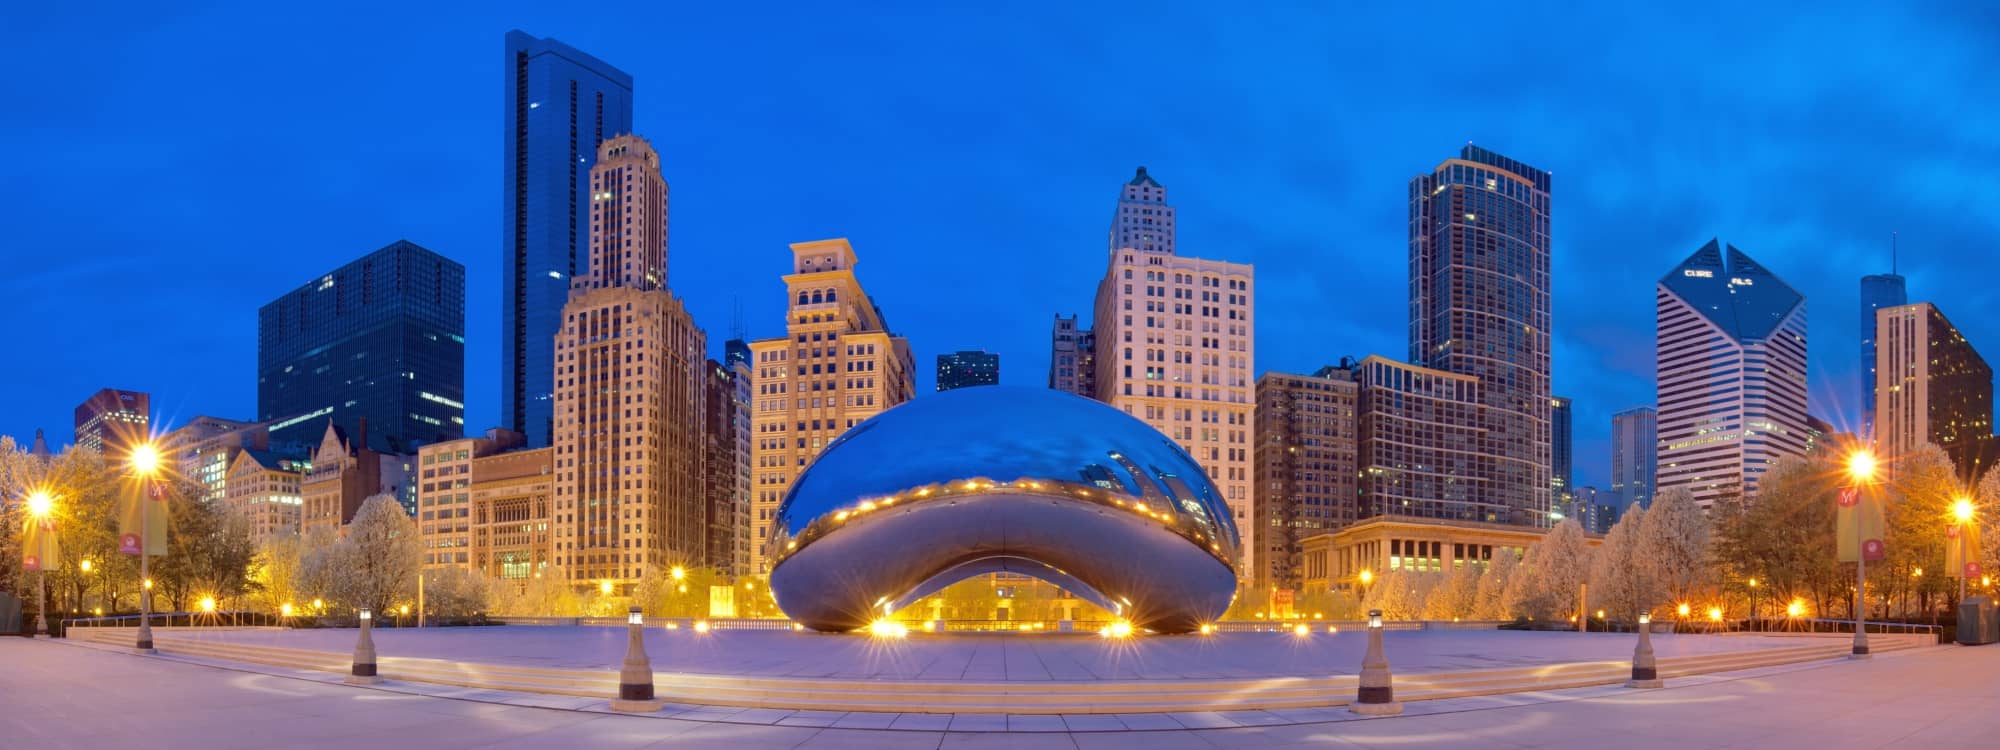 Best Deals On Chicago Flights | Fly To Chicago With Cheap Tickets